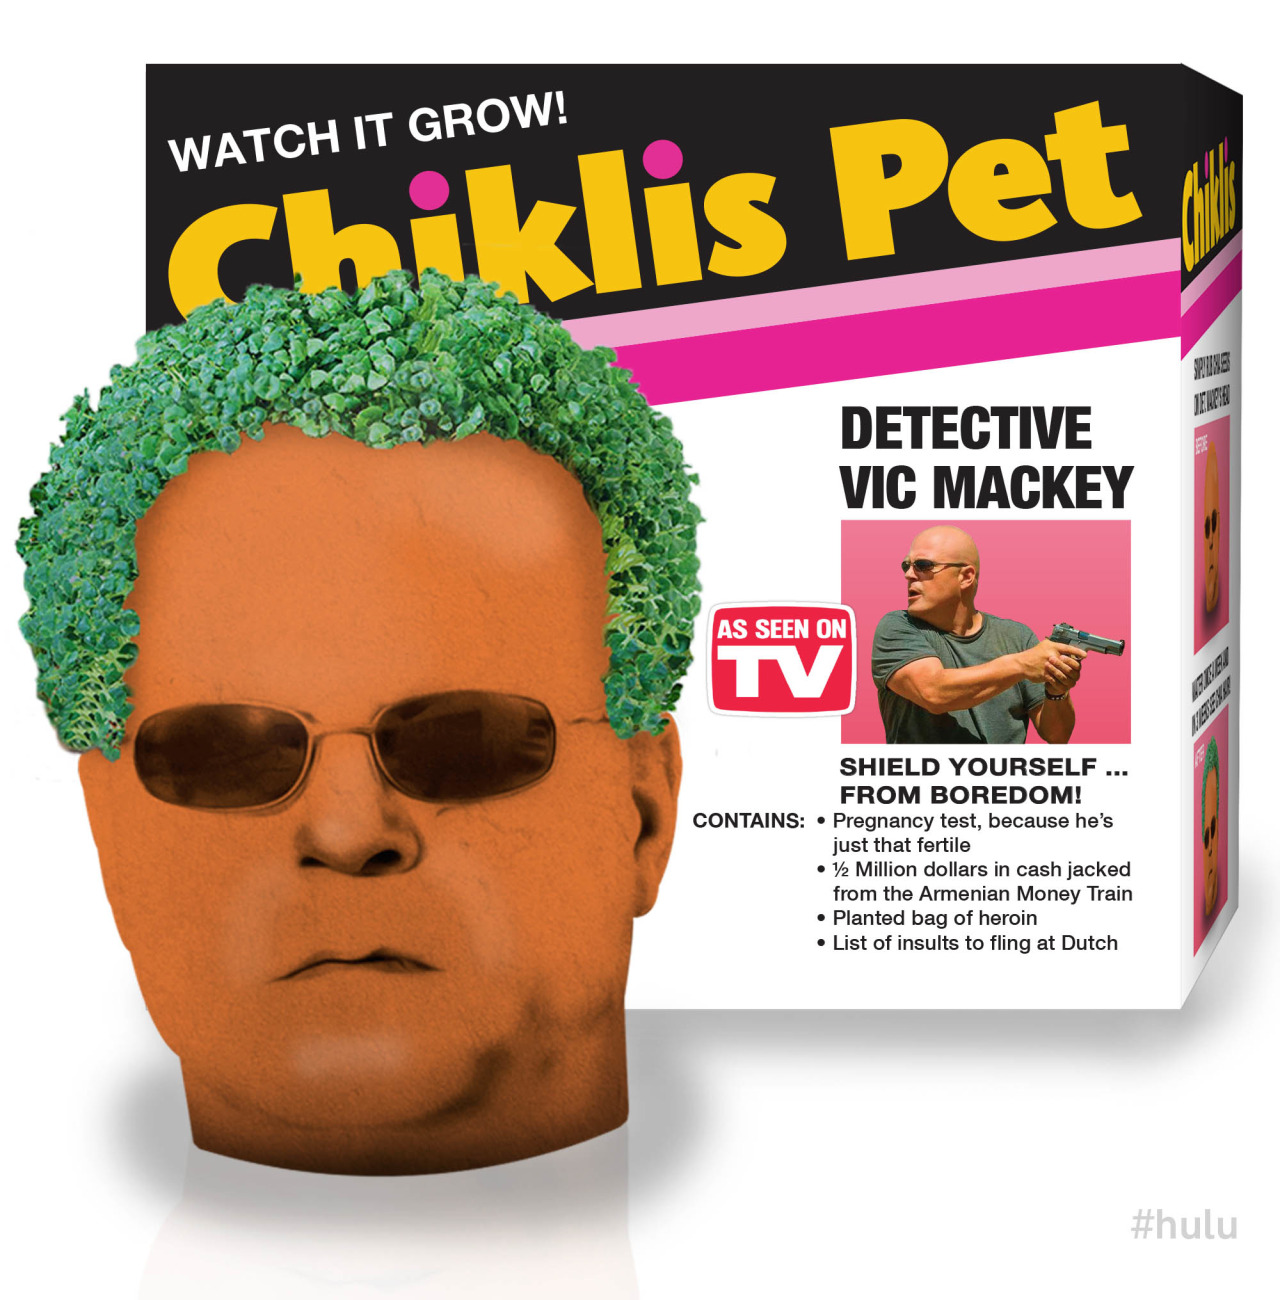 Ch-ch-ch-Chiklis… Happy Birthday, Michael Chiklis!
We got you this Det. Mackey Chia Pet to celebrate. Just soak it, spread the seeds, and watch the Dutch insults bloom!